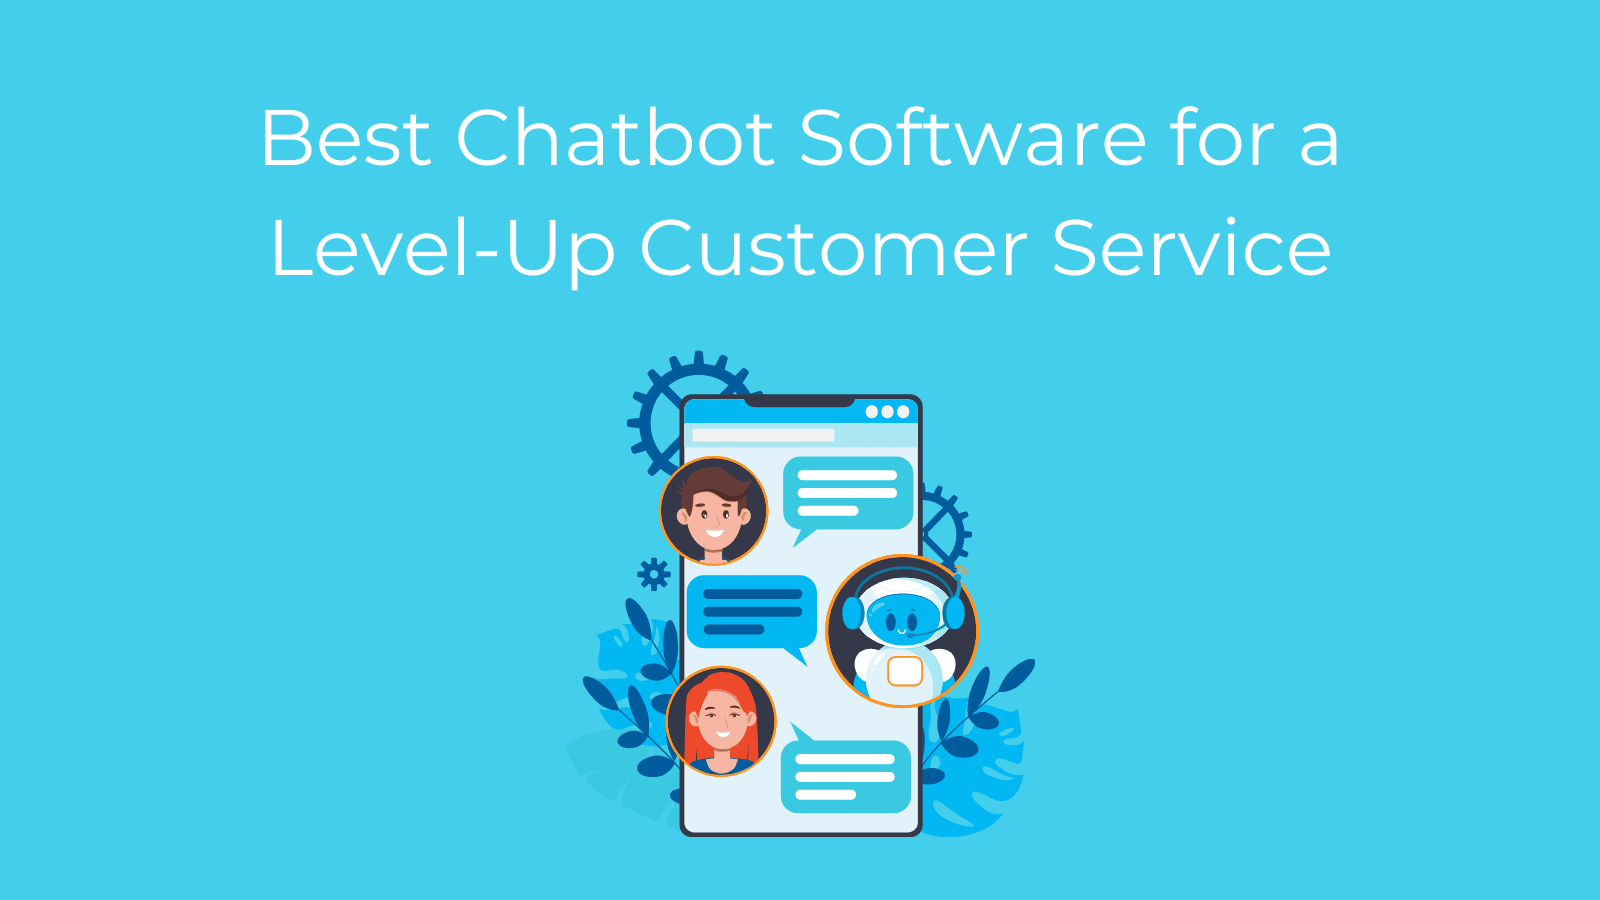 8 Best Chatbot Software for a Level-Up Customer Service